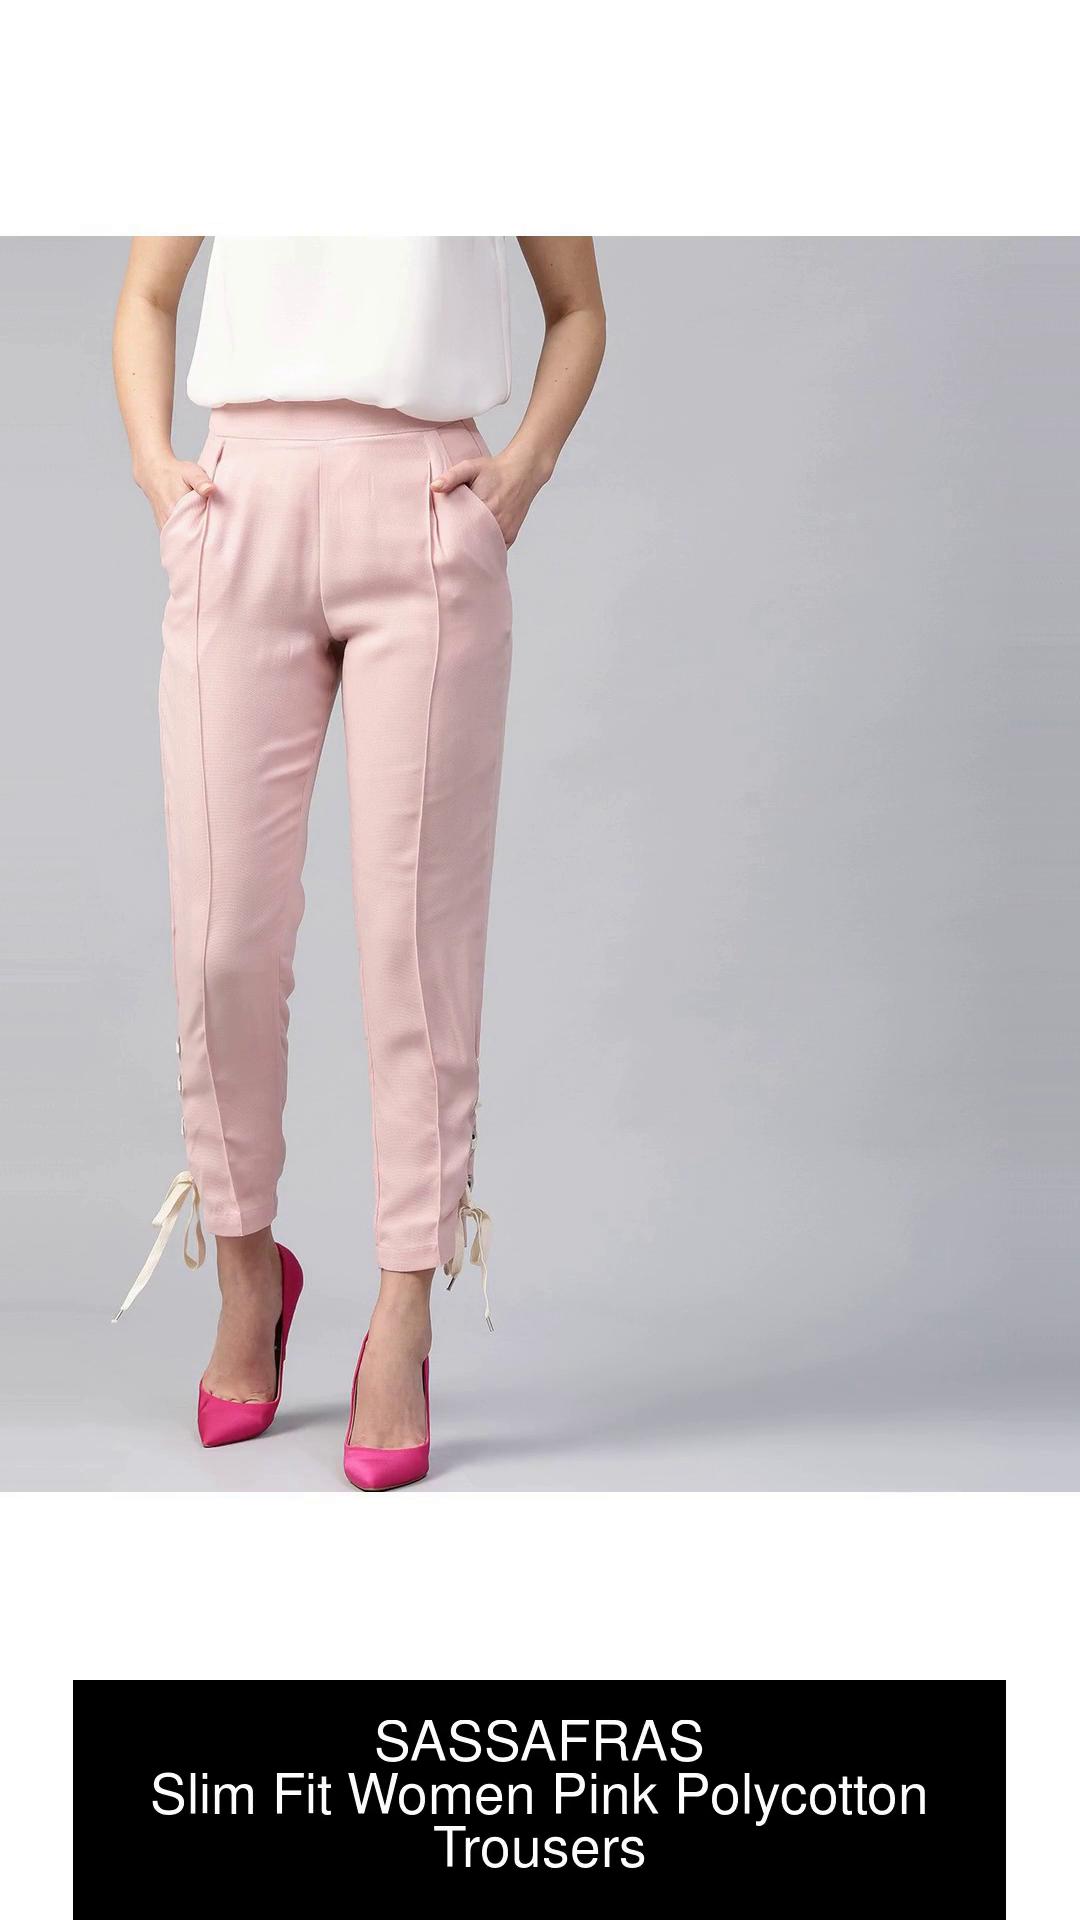 SASSAFRAS Slim Fit Women Pink Trousers - Buy SASSAFRAS Slim Fit Women Pink  Trousers Online at Best Prices in India